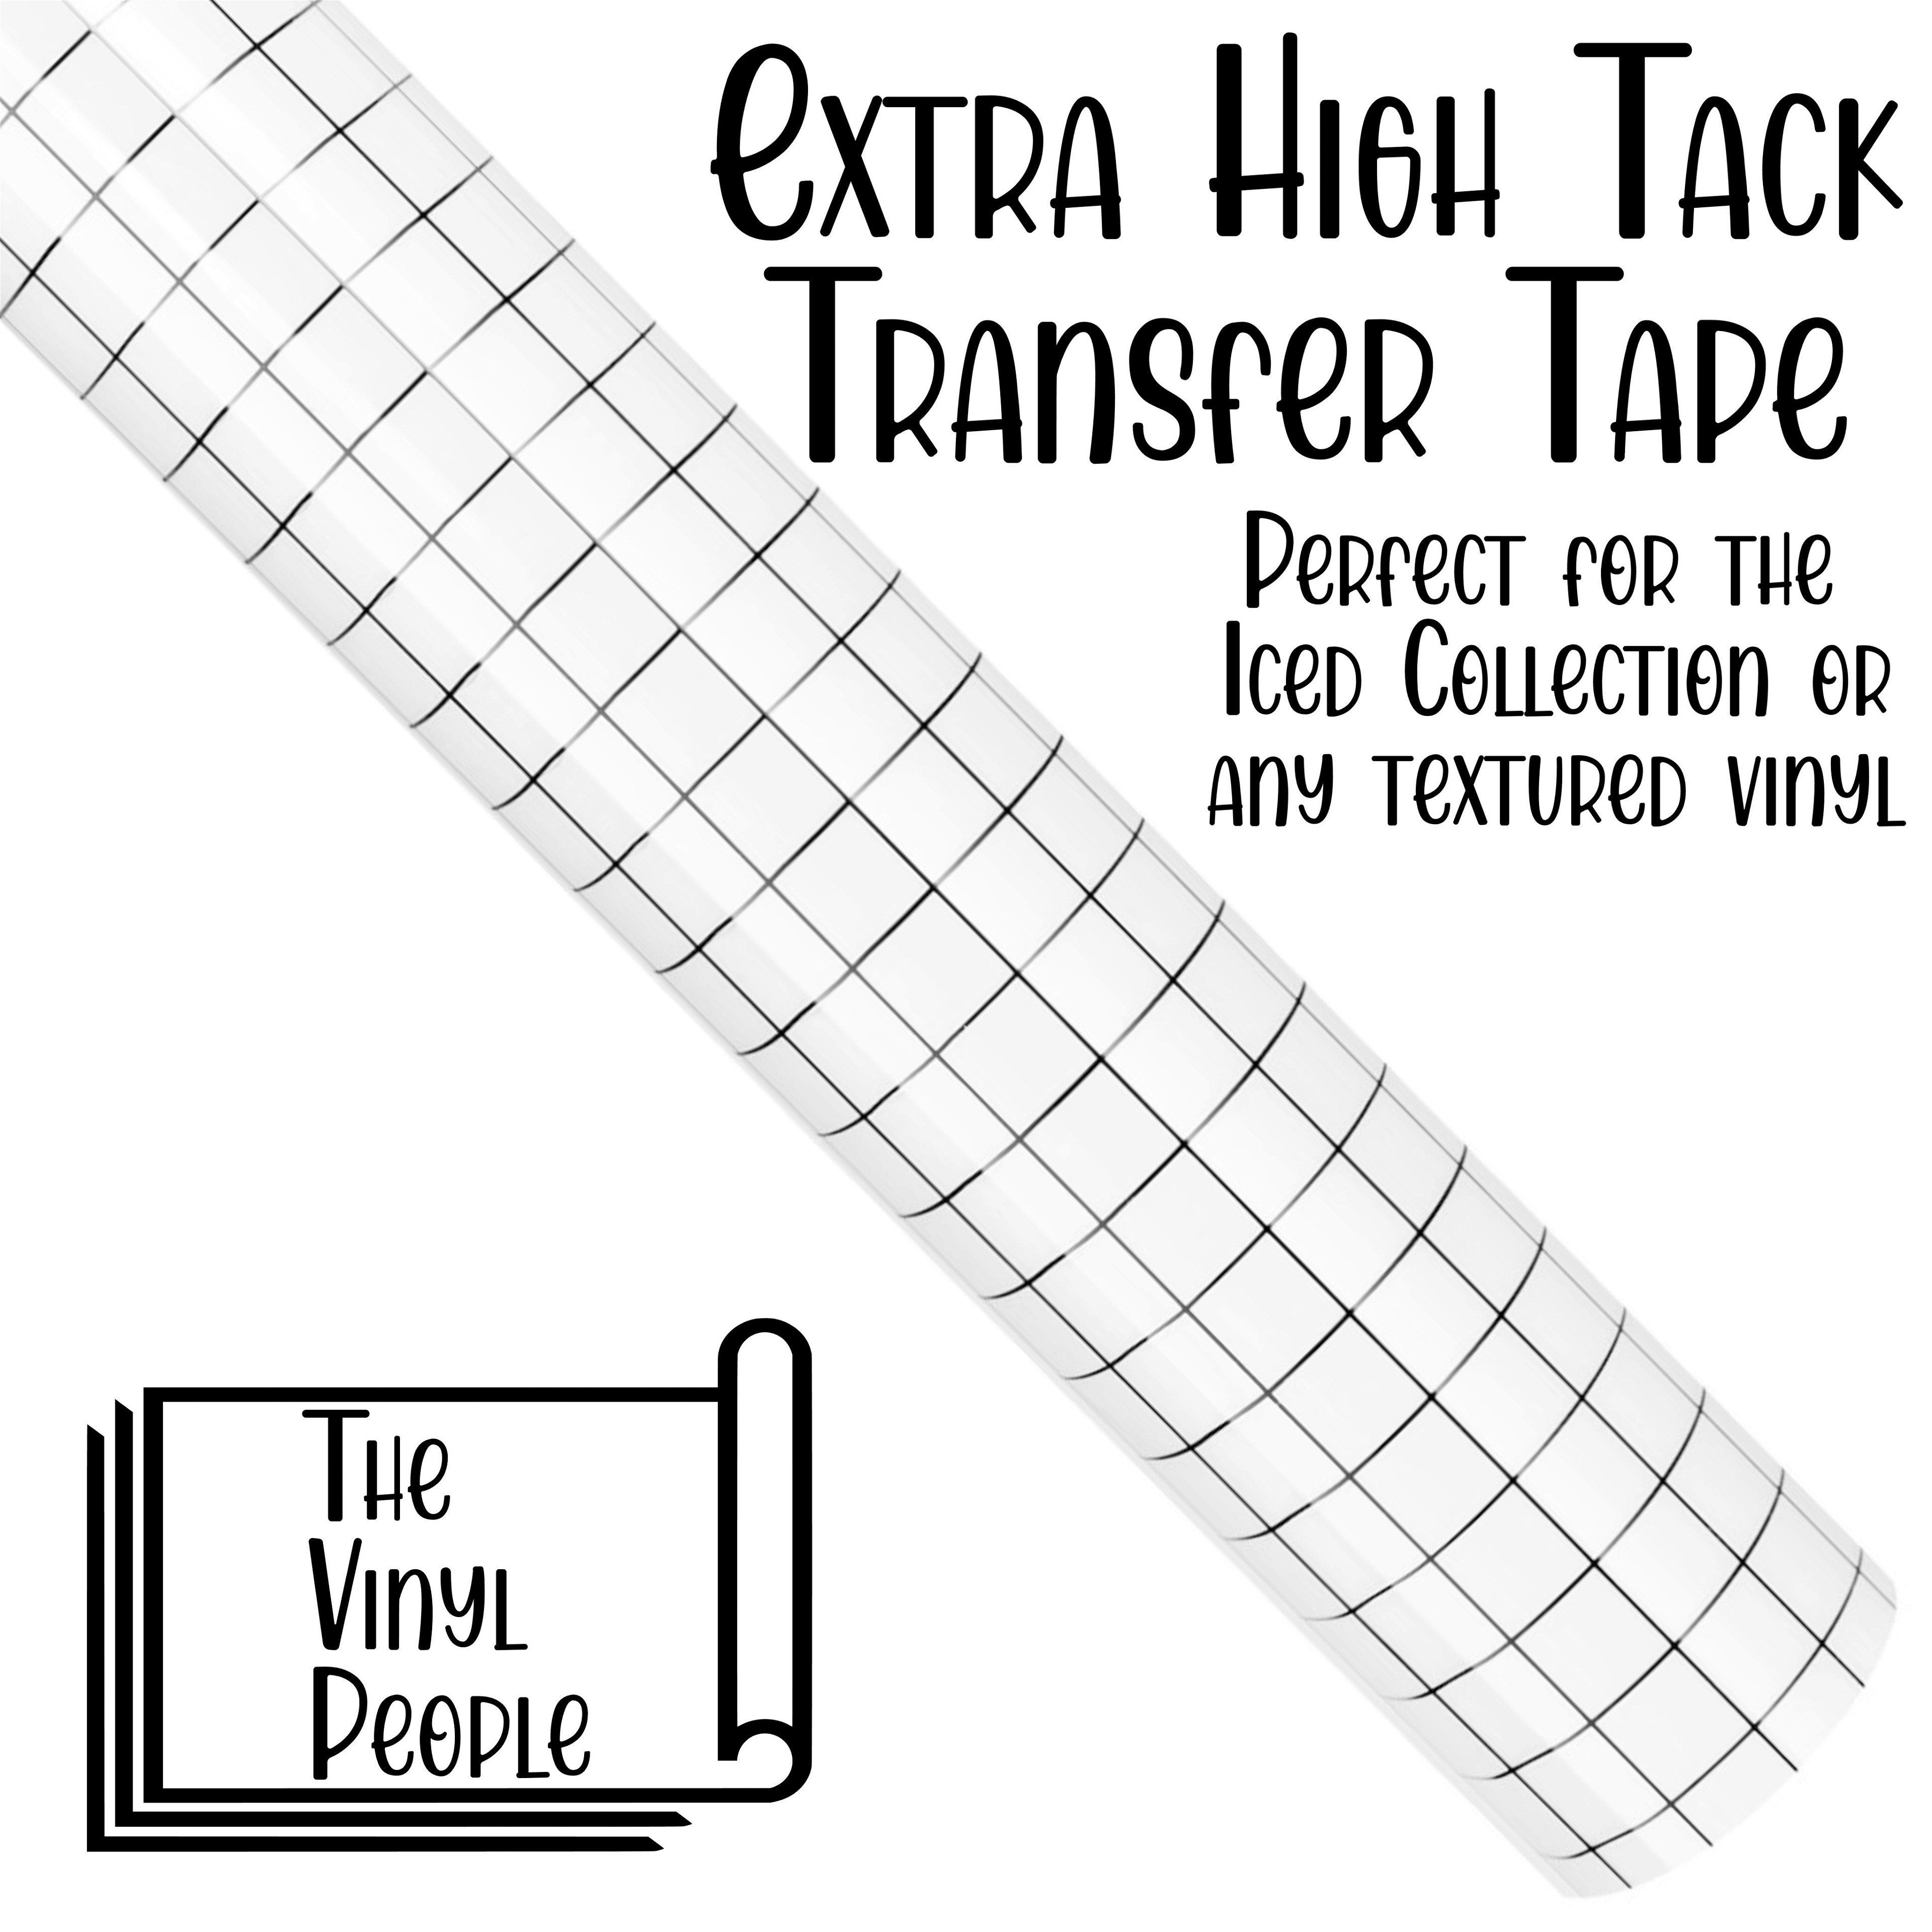 EXTRA HIGH TACK Transfer Tape with Black or Yellow Gridlines - 12" x 5ft roll